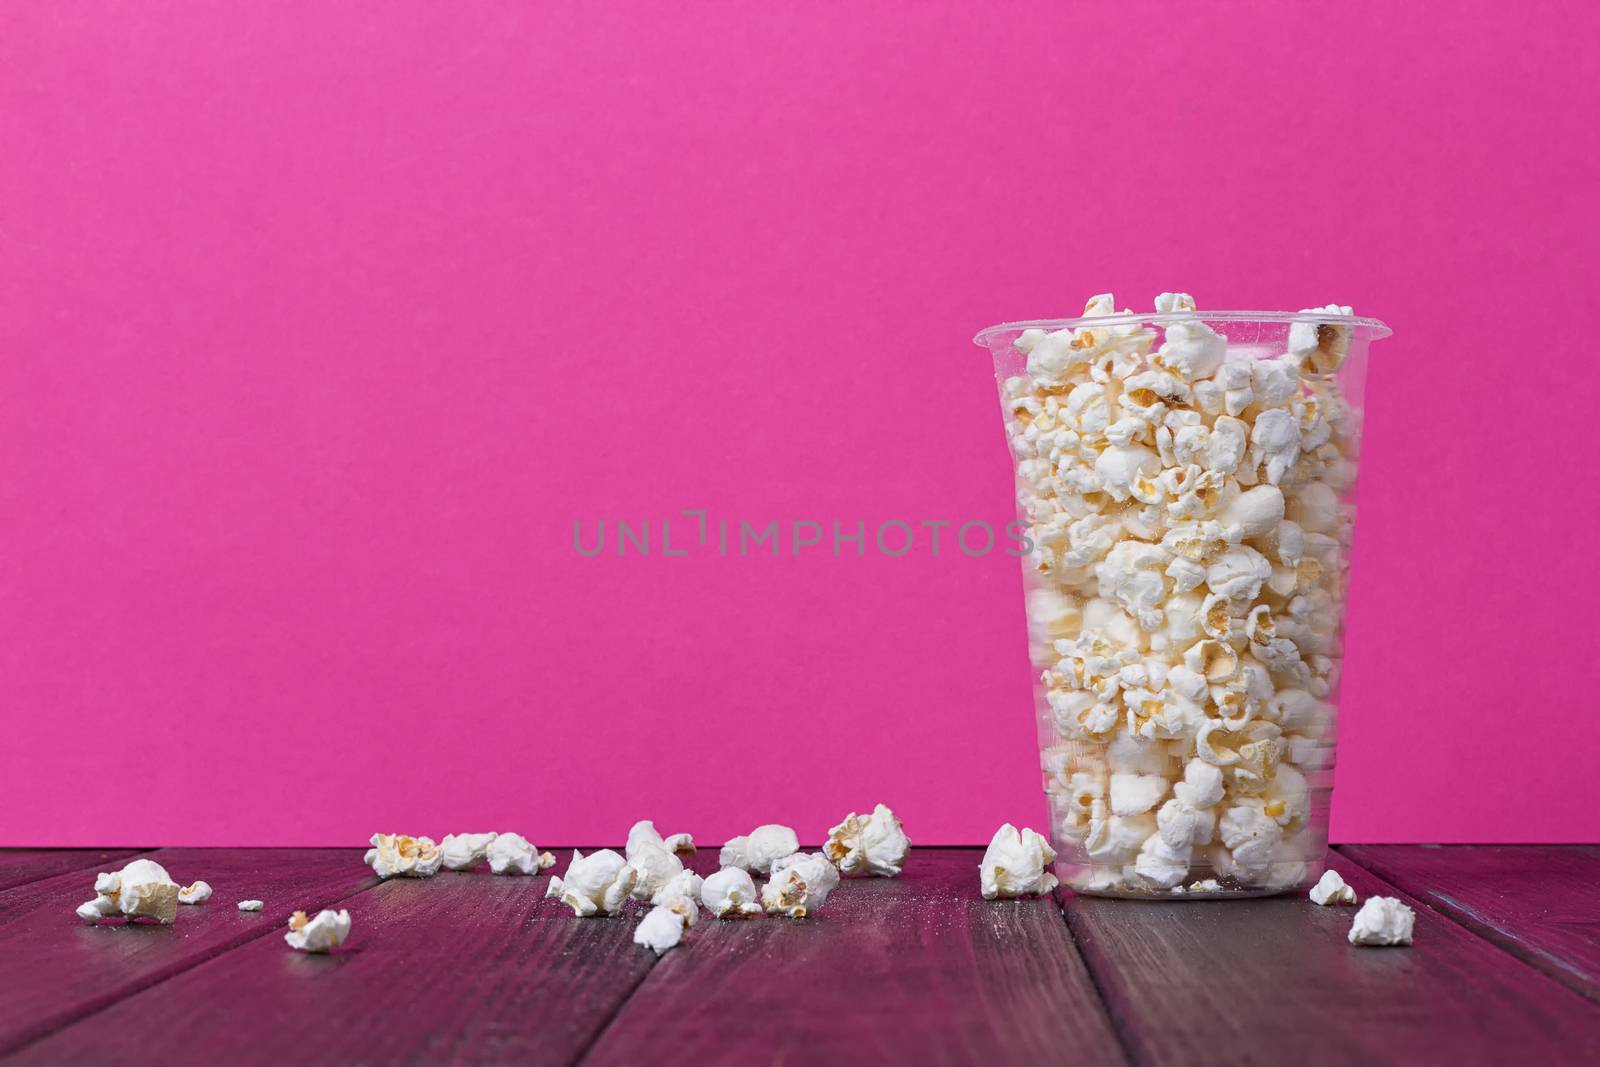 Popcorn In Bucket on the Pink Background.